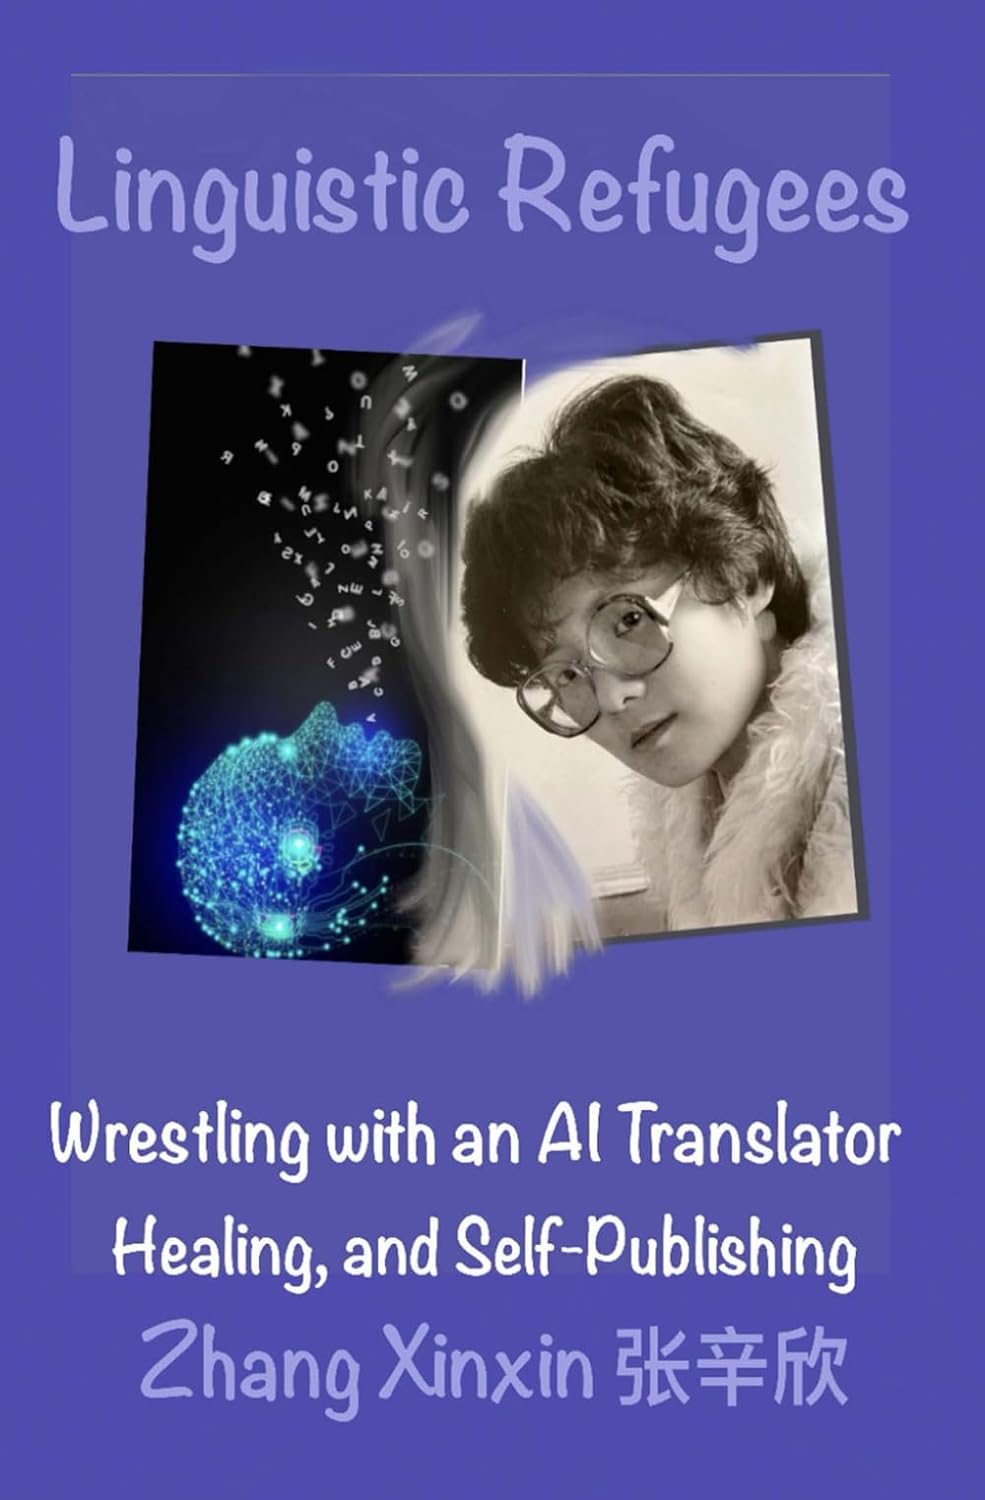 Linguistic Refugees Wrestling with an AI Translator, Healing and Self-Publishing